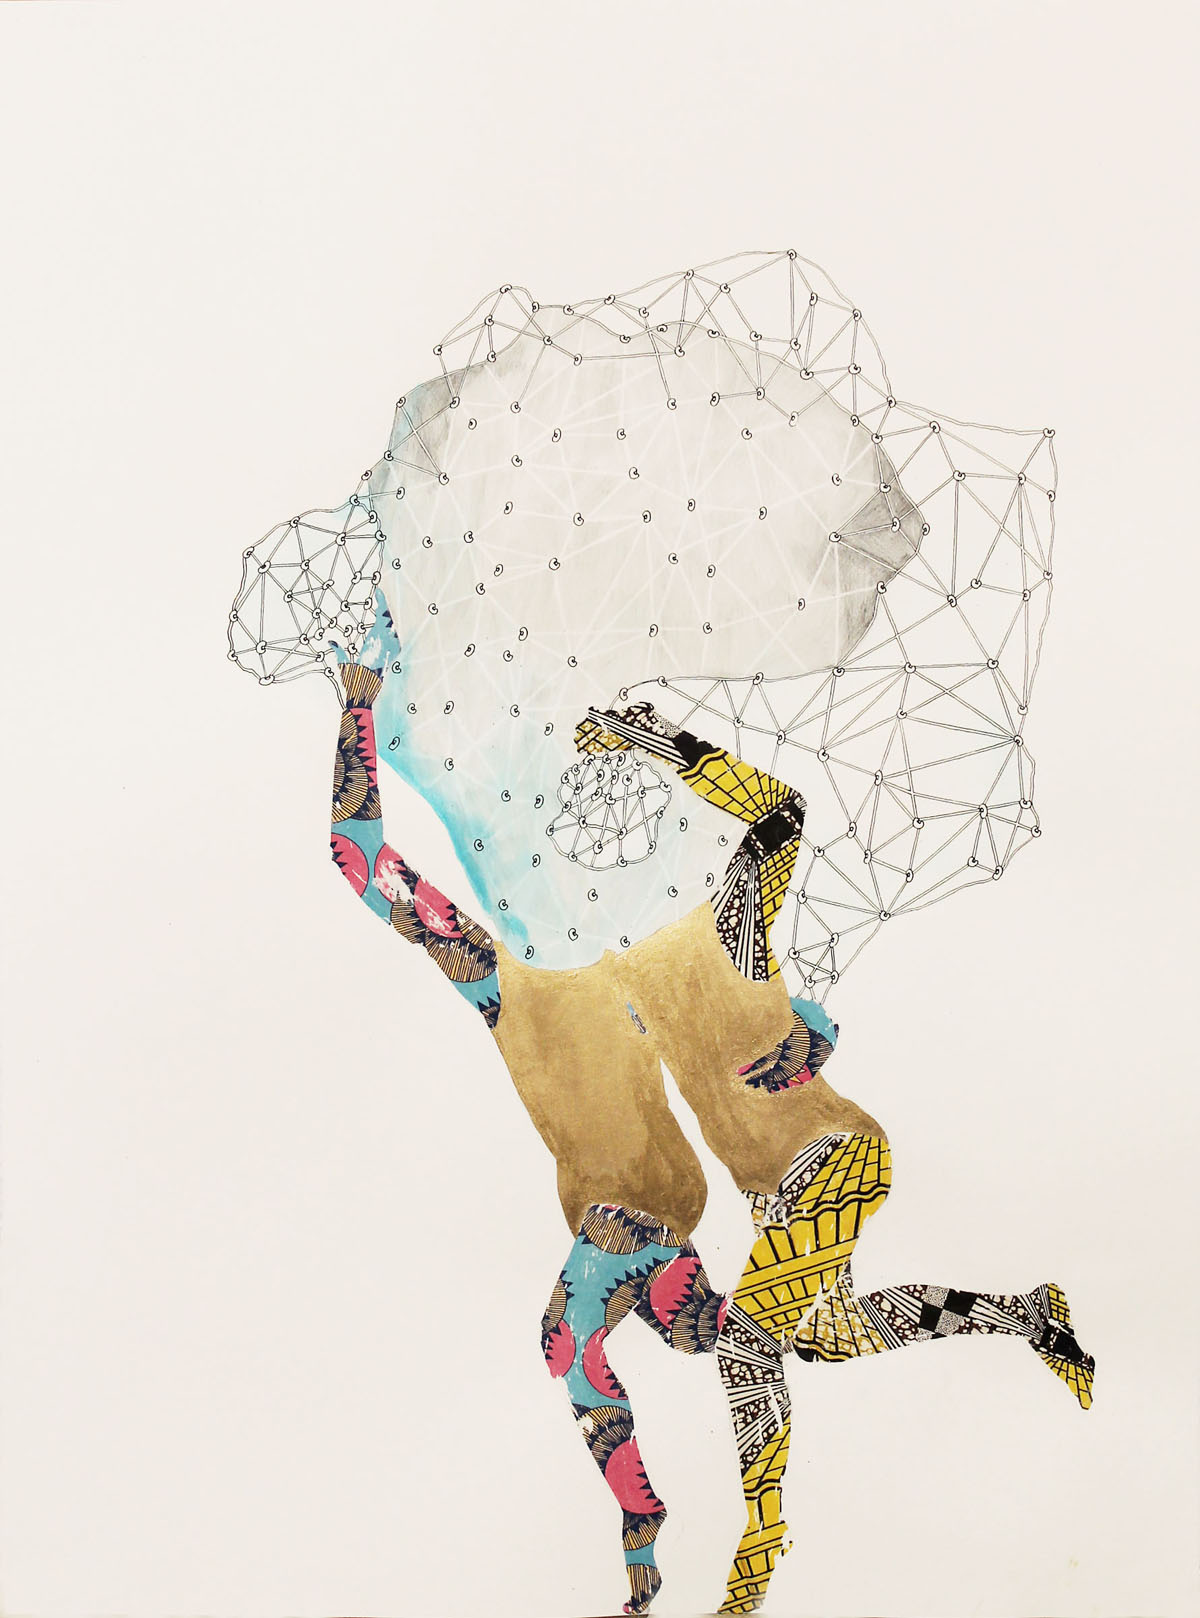 ruby_onyinyechi_amanze-17_carrying_a_cloud_is_easy_if_you_know_how_2015_Photo_transfers_metallic_pigment_ink_graphite